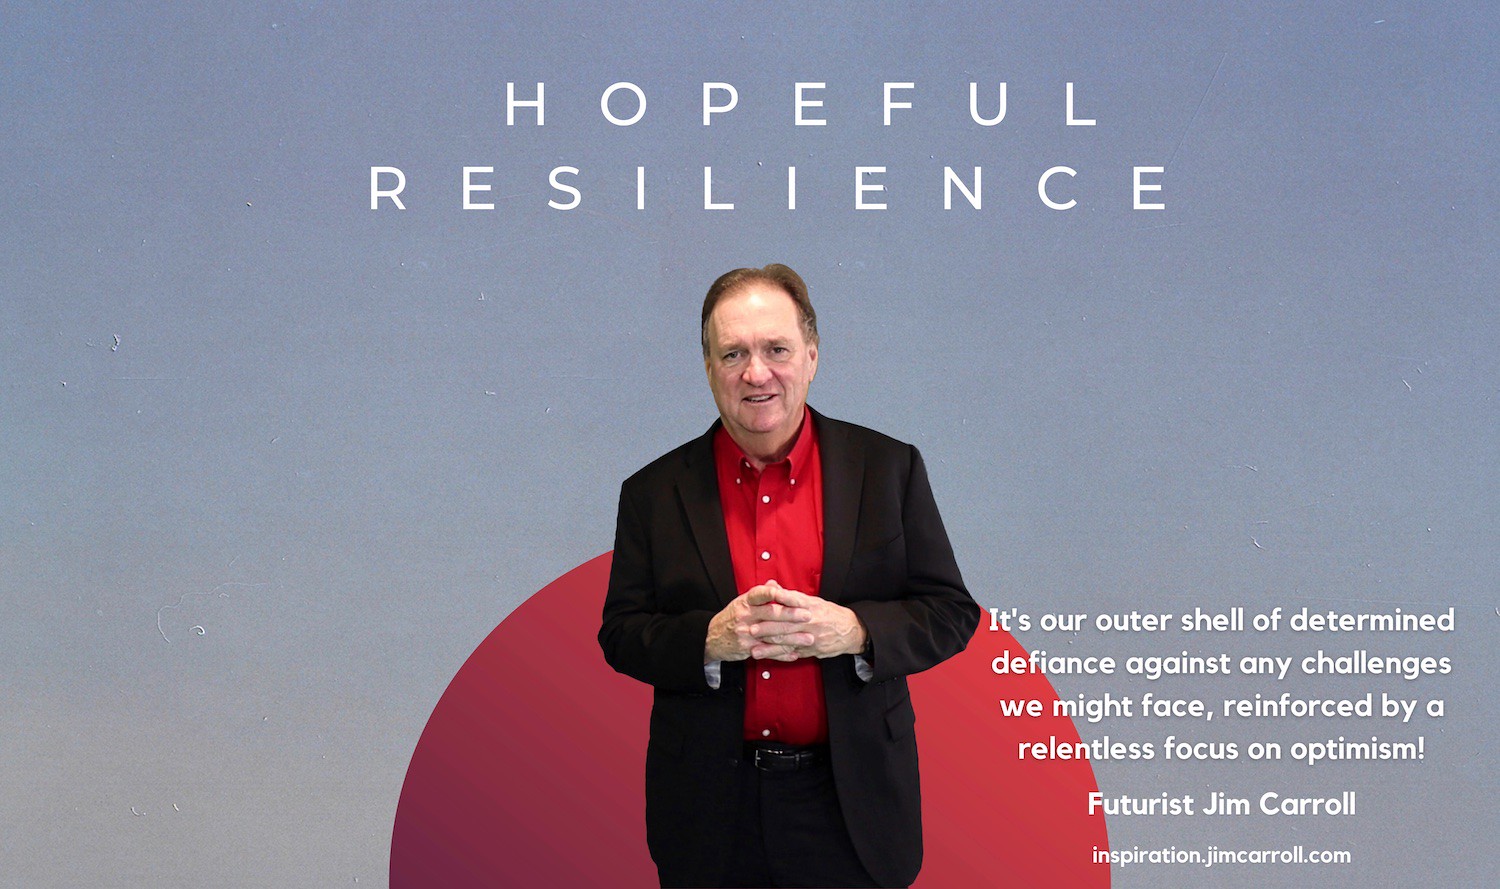 "Hopeful Resilience: It's our outer shell of determined defiance against any challenges we might face, reinforced by a relentless focus on optimism!" - Futurist Jim Carroll